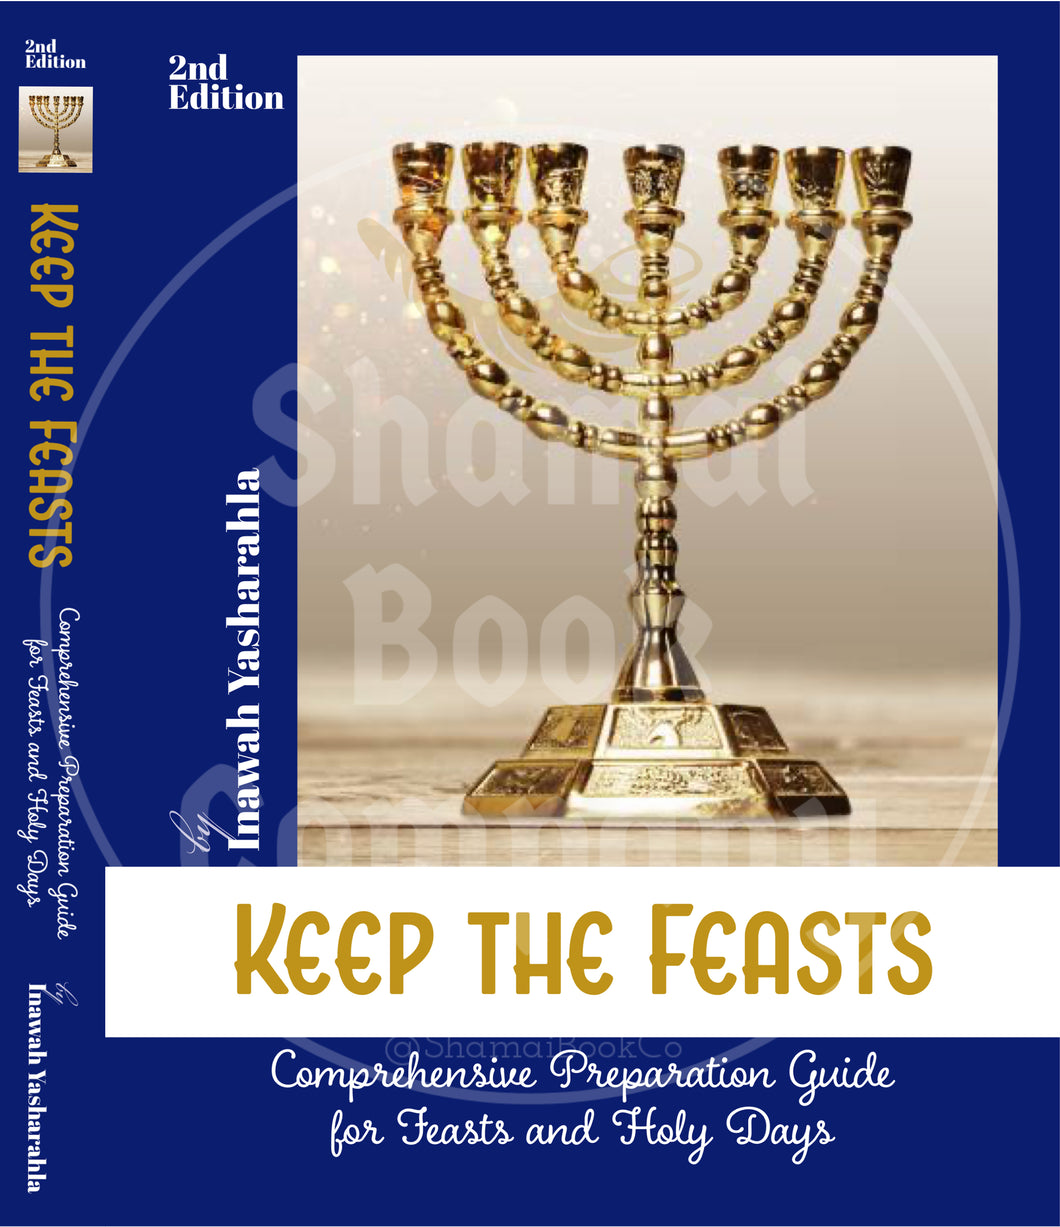 Keep The Feasts: Comprehensive Preparation Guide for Feasts & Holy Days {2nd Edition}